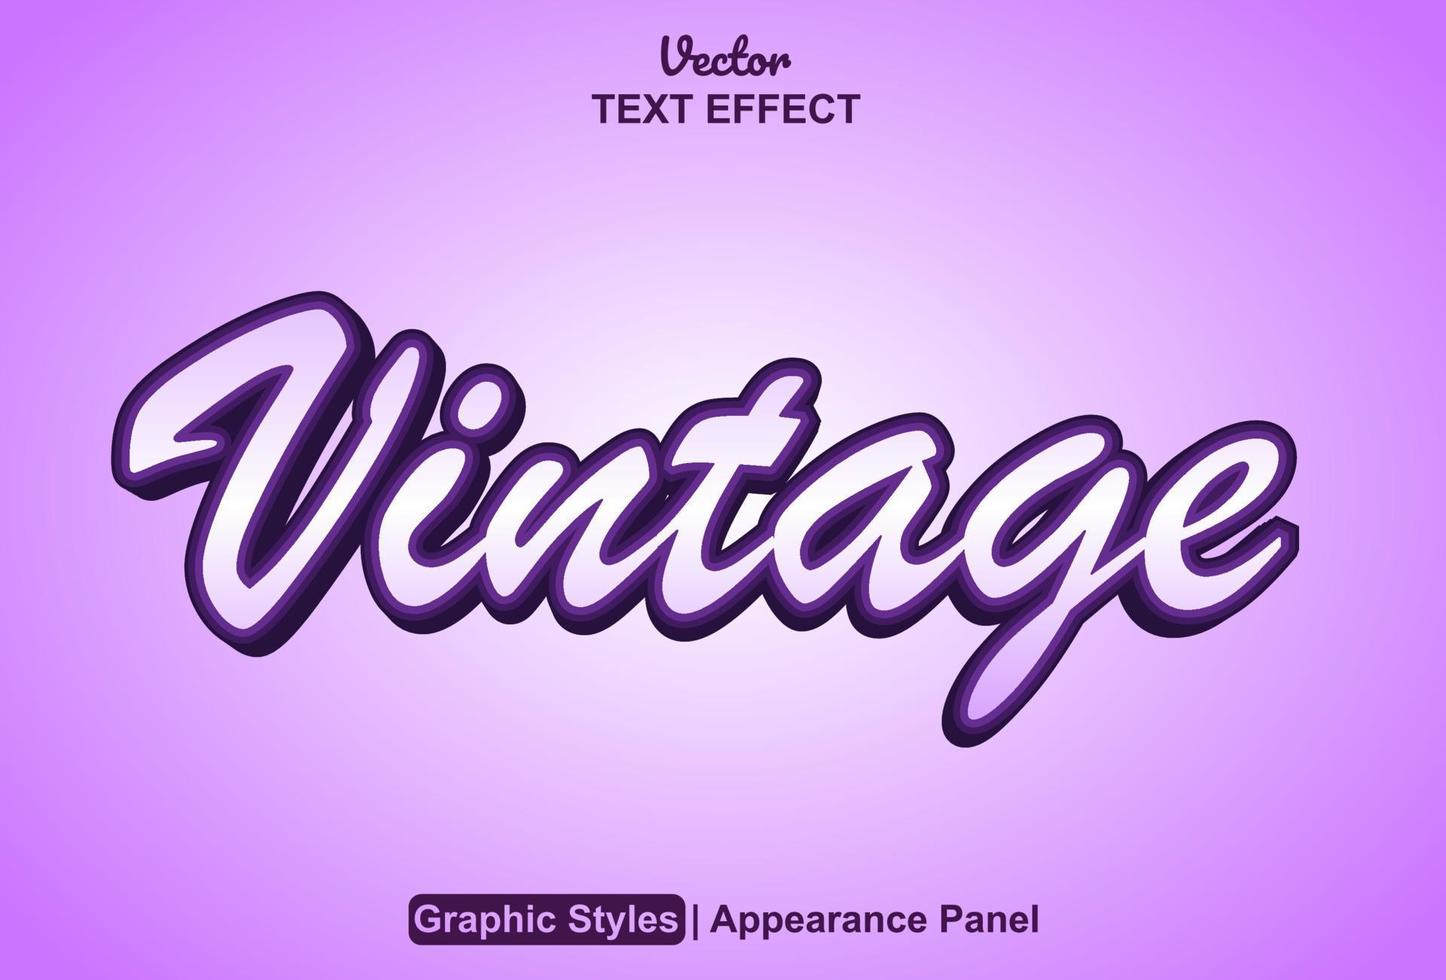 vintage text effect with graphic style and editable. vector